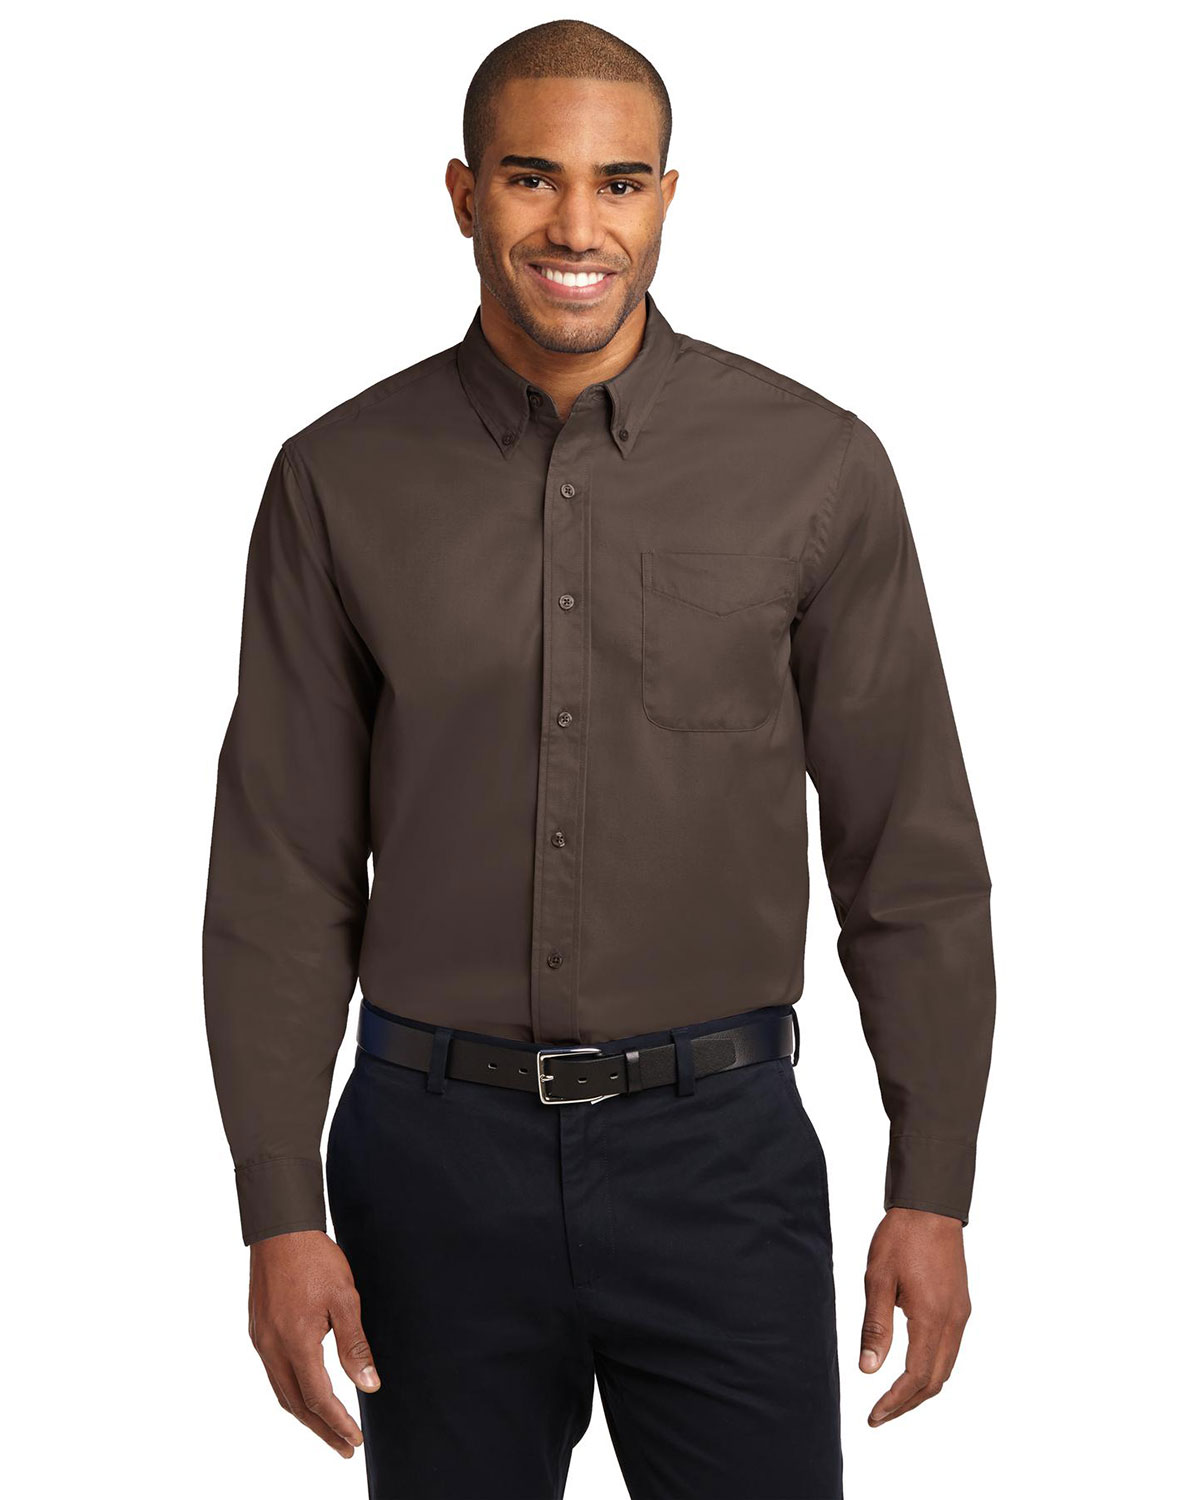 Port Authority S608 Men Long-Sleeve Easy Care Shirt at Apparelstation